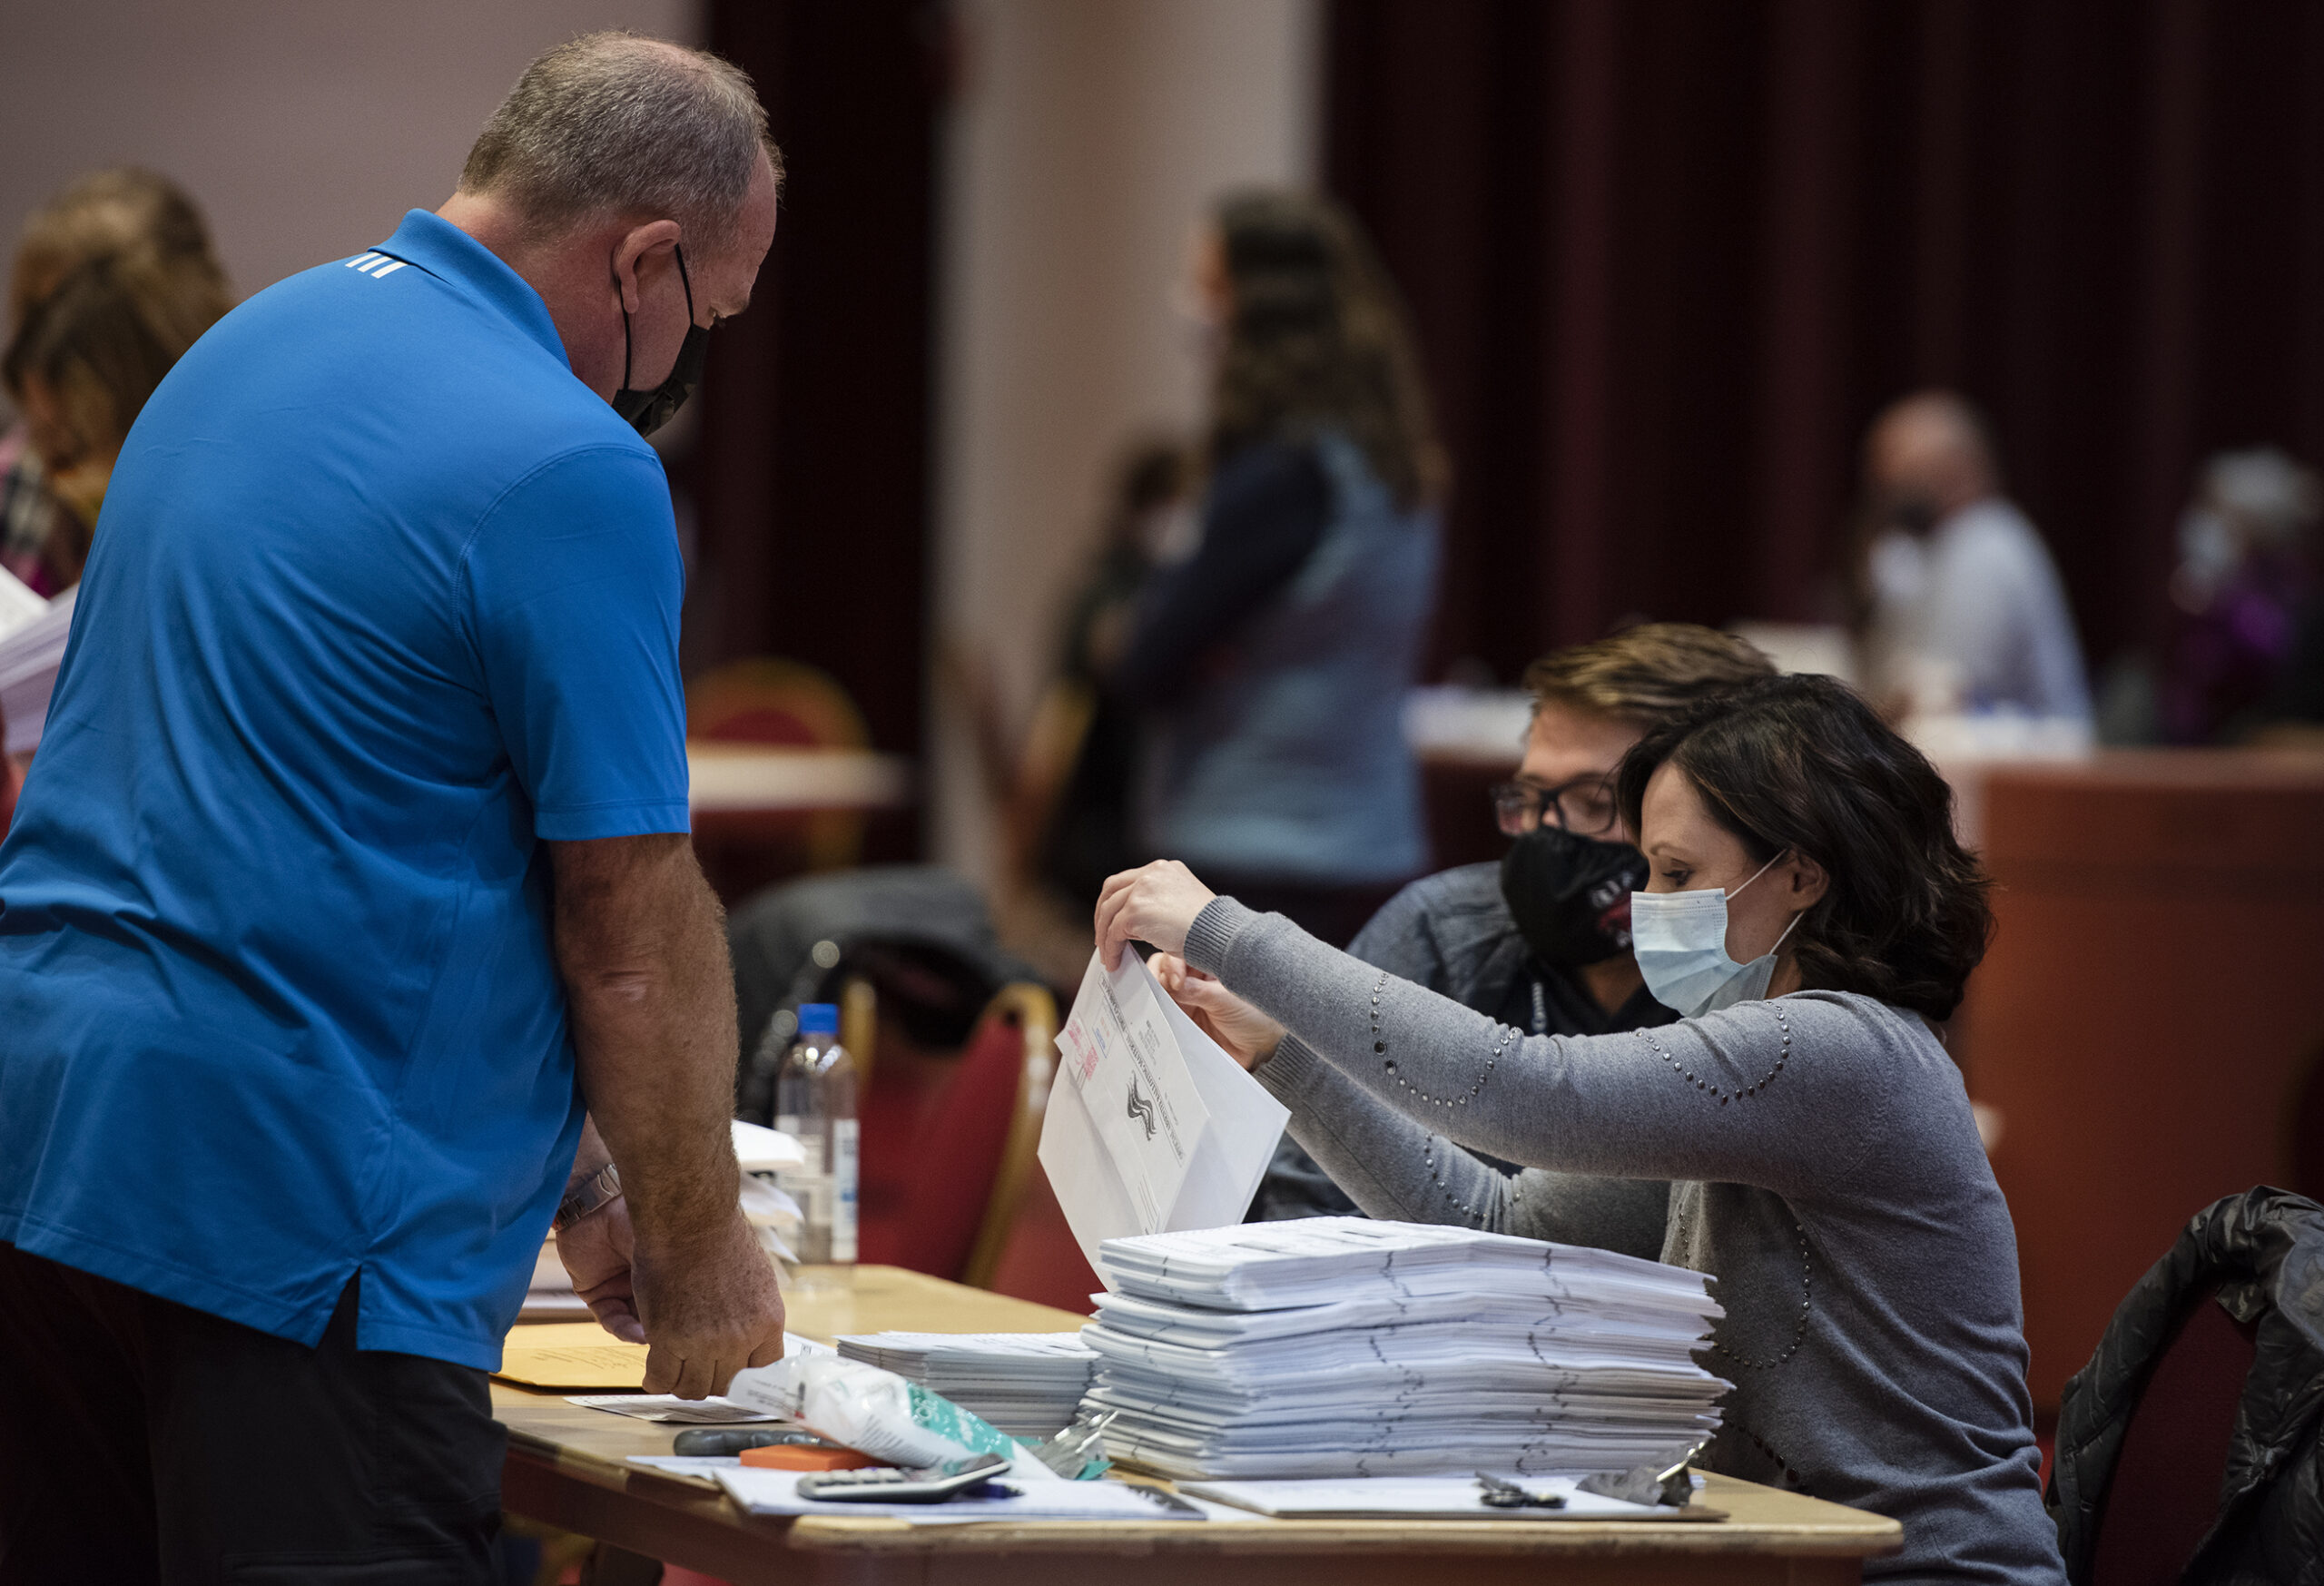 Two workers go through a large stack of ballots on a table